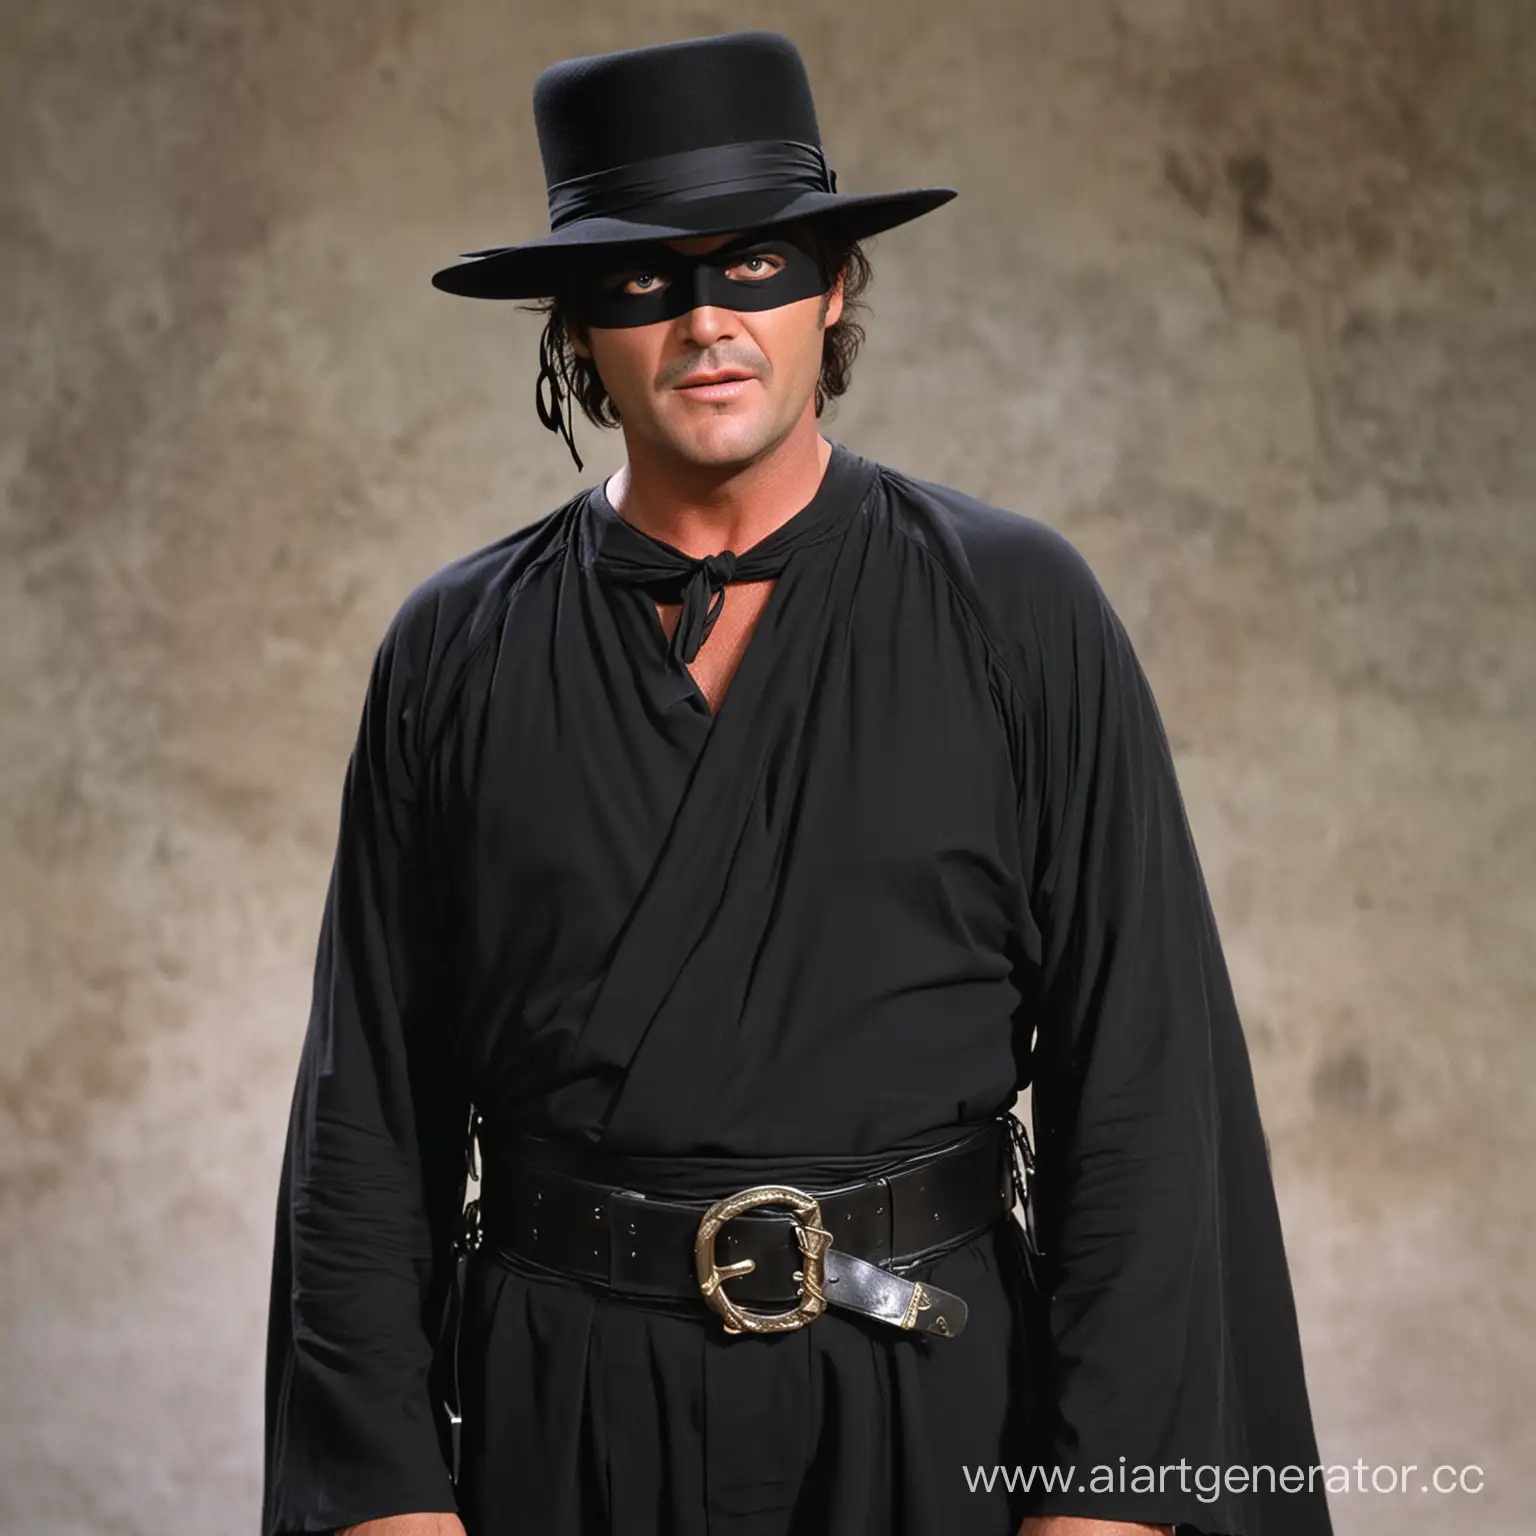 Jack-Nicholson-as-Zorro-Portrait-Iconic-Actor-in-Classic-Swashbuckling-Costume